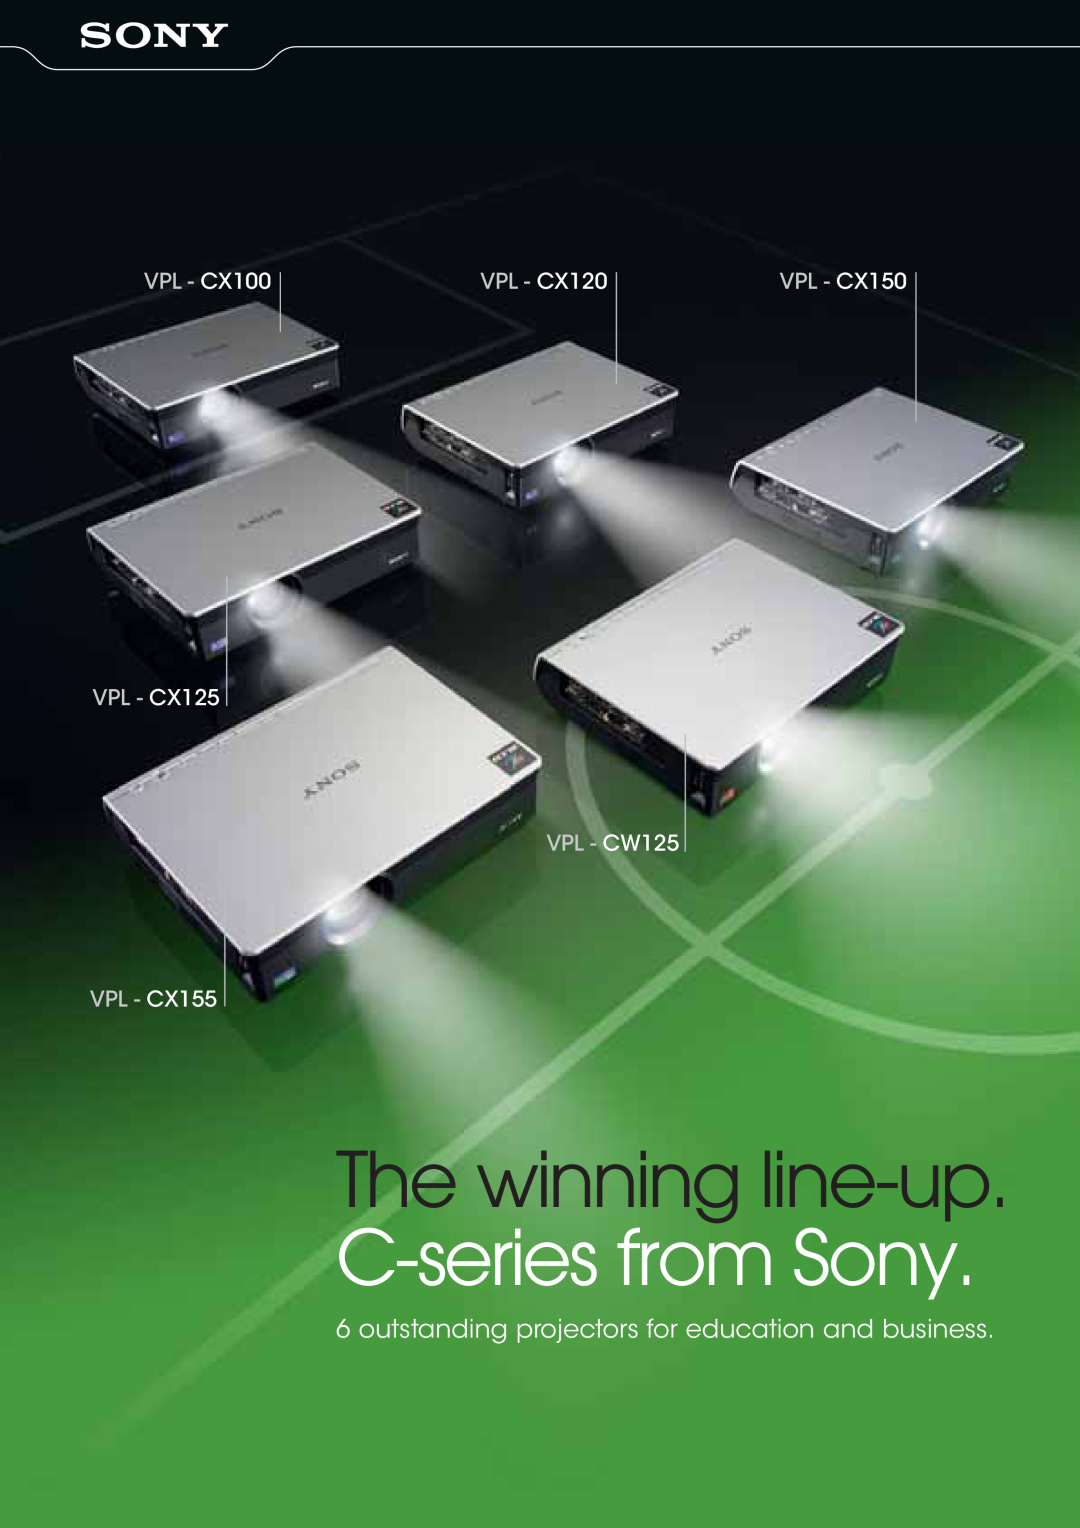 Sony VPL-CX150 manual The winning line-up. C-series from Sony, outstanding projectors for education and business 